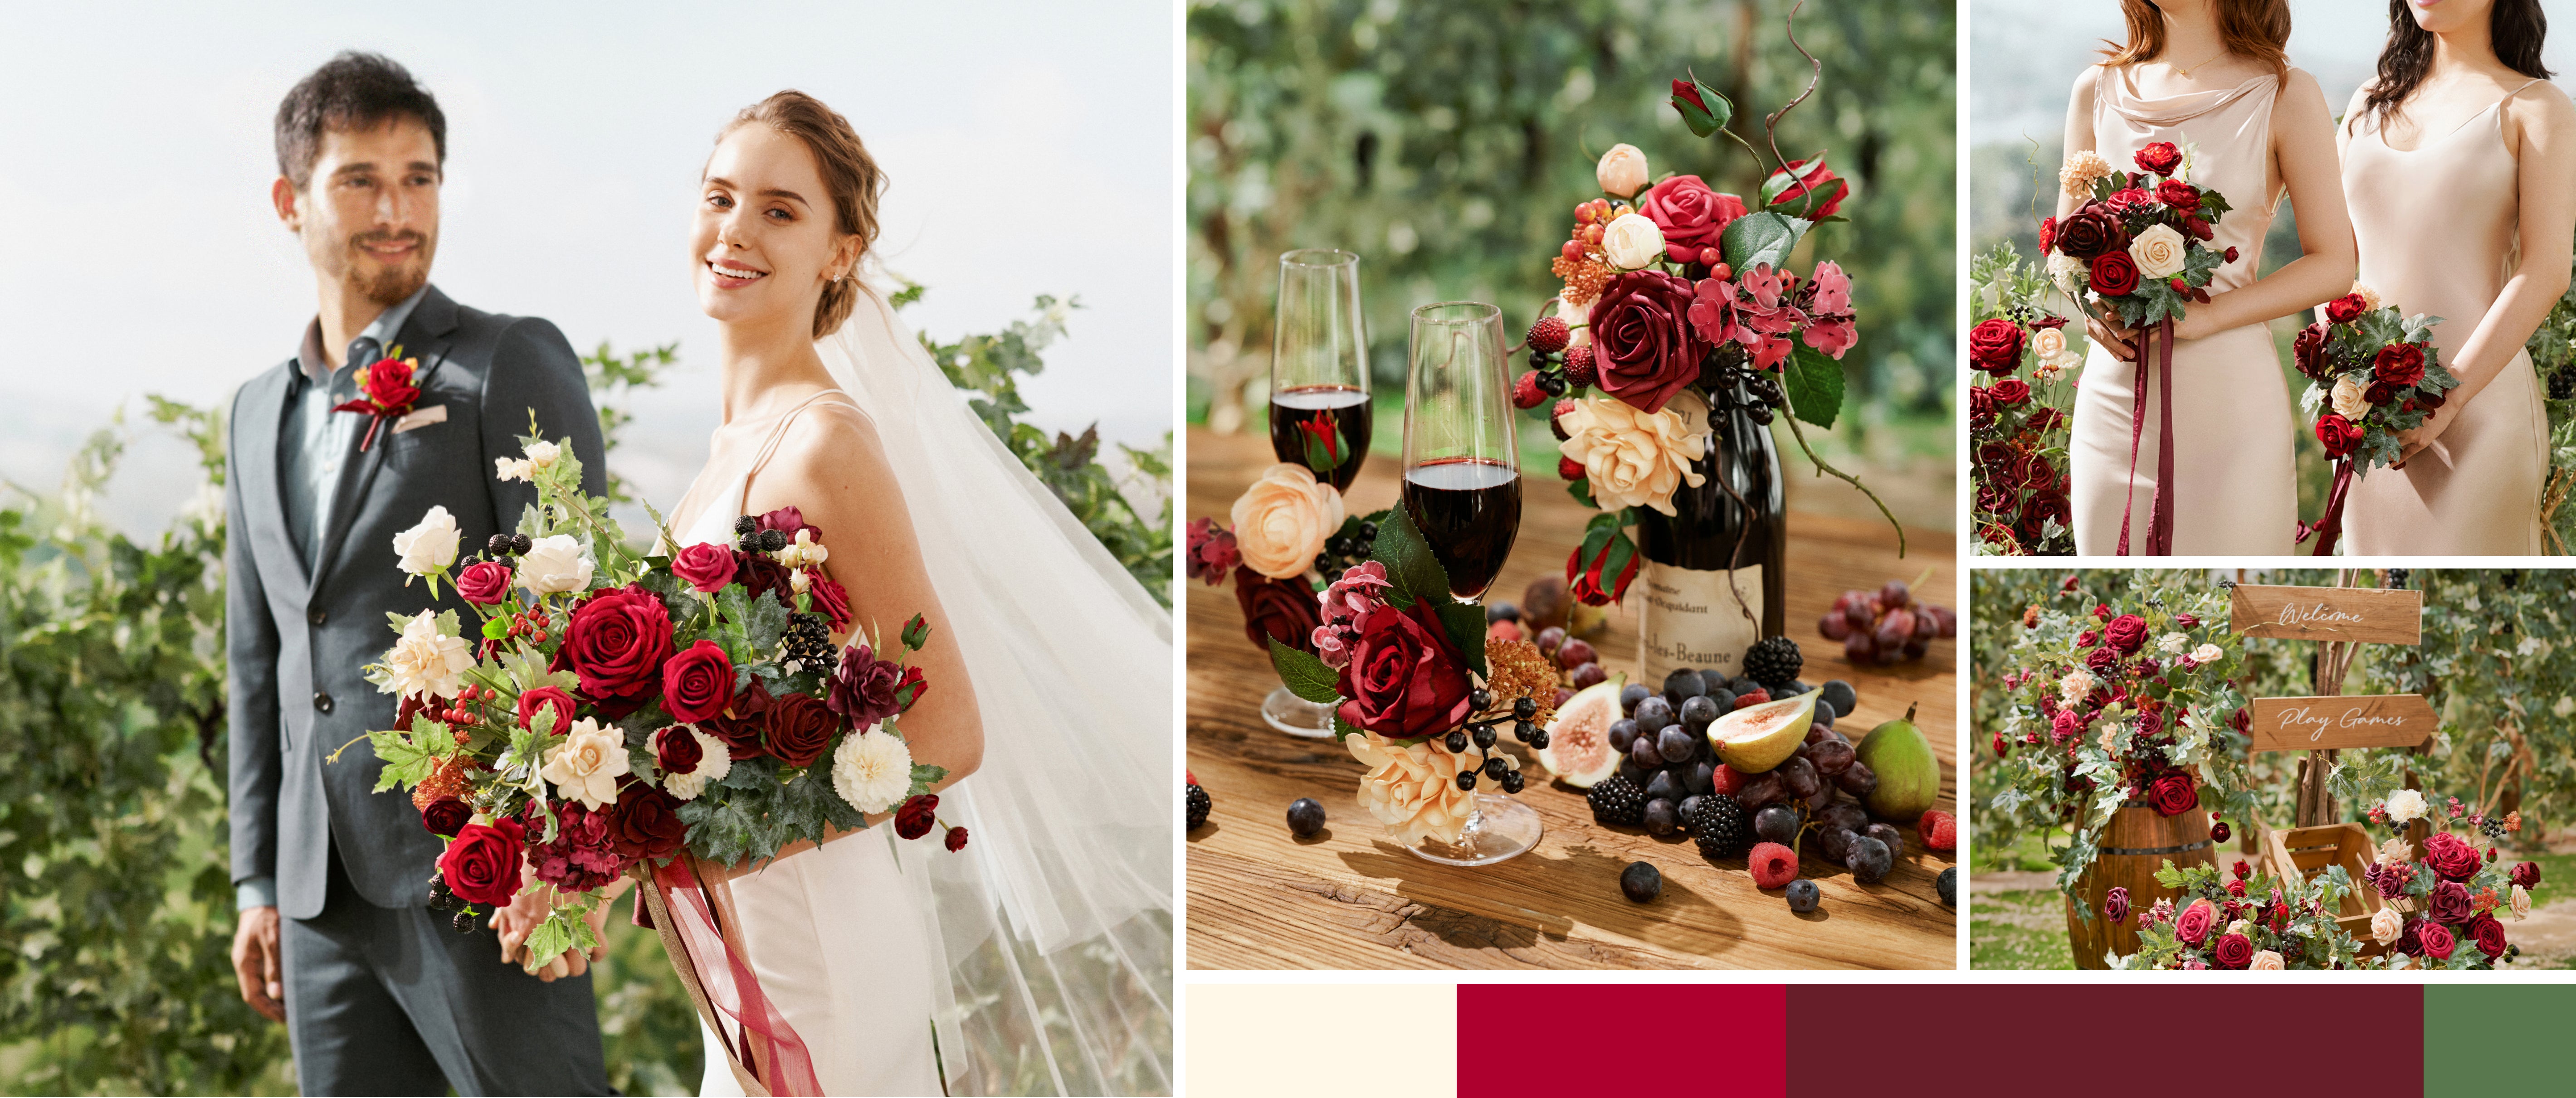 Bordeaux Red & Wine Wedding pc banner